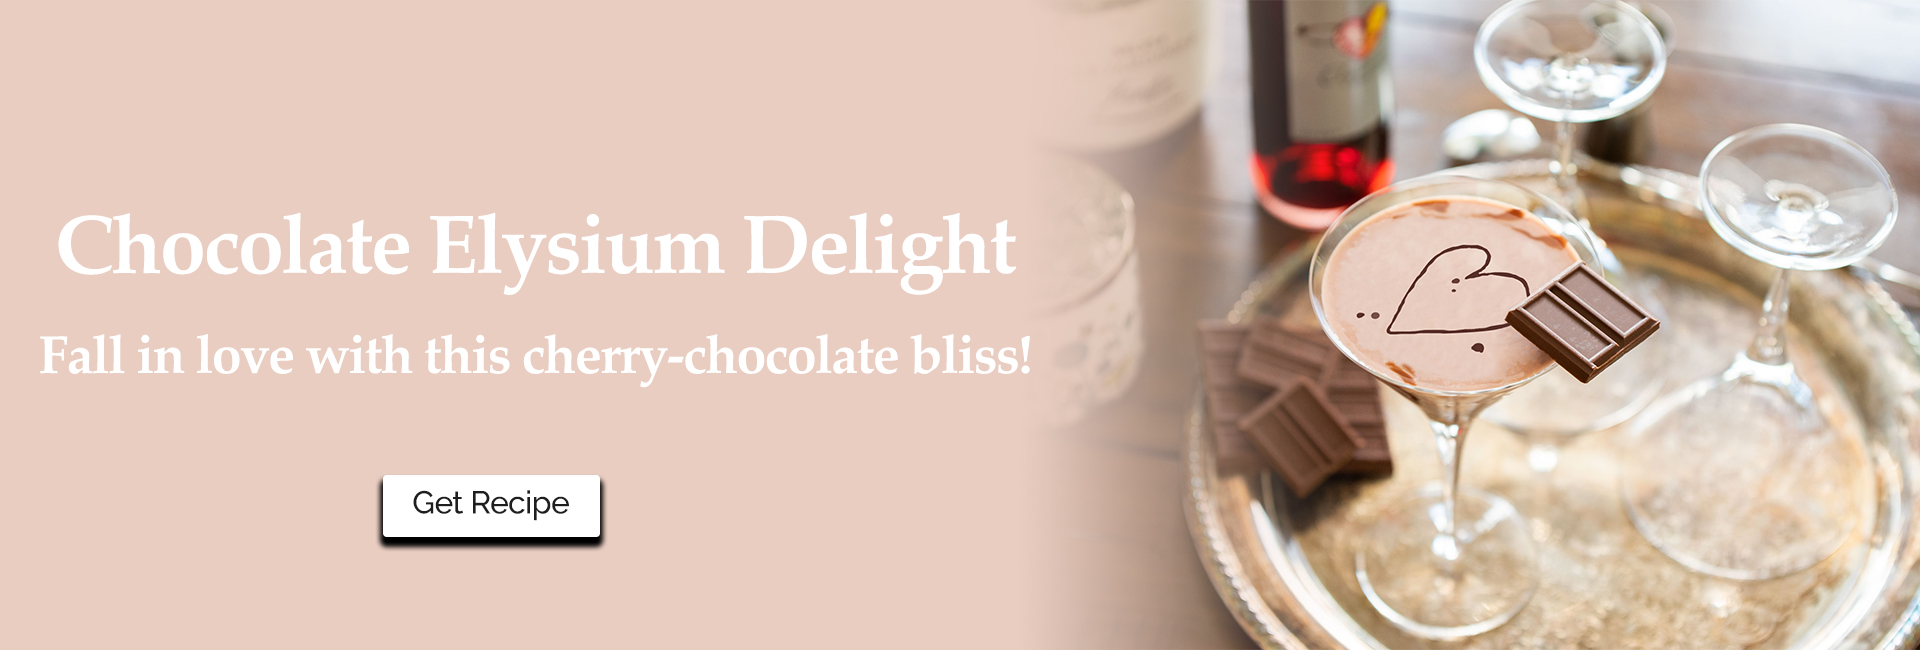 Chocolate Elysium Delight. Fall in love with this cherry-chocolate bliss. Get Recipe button